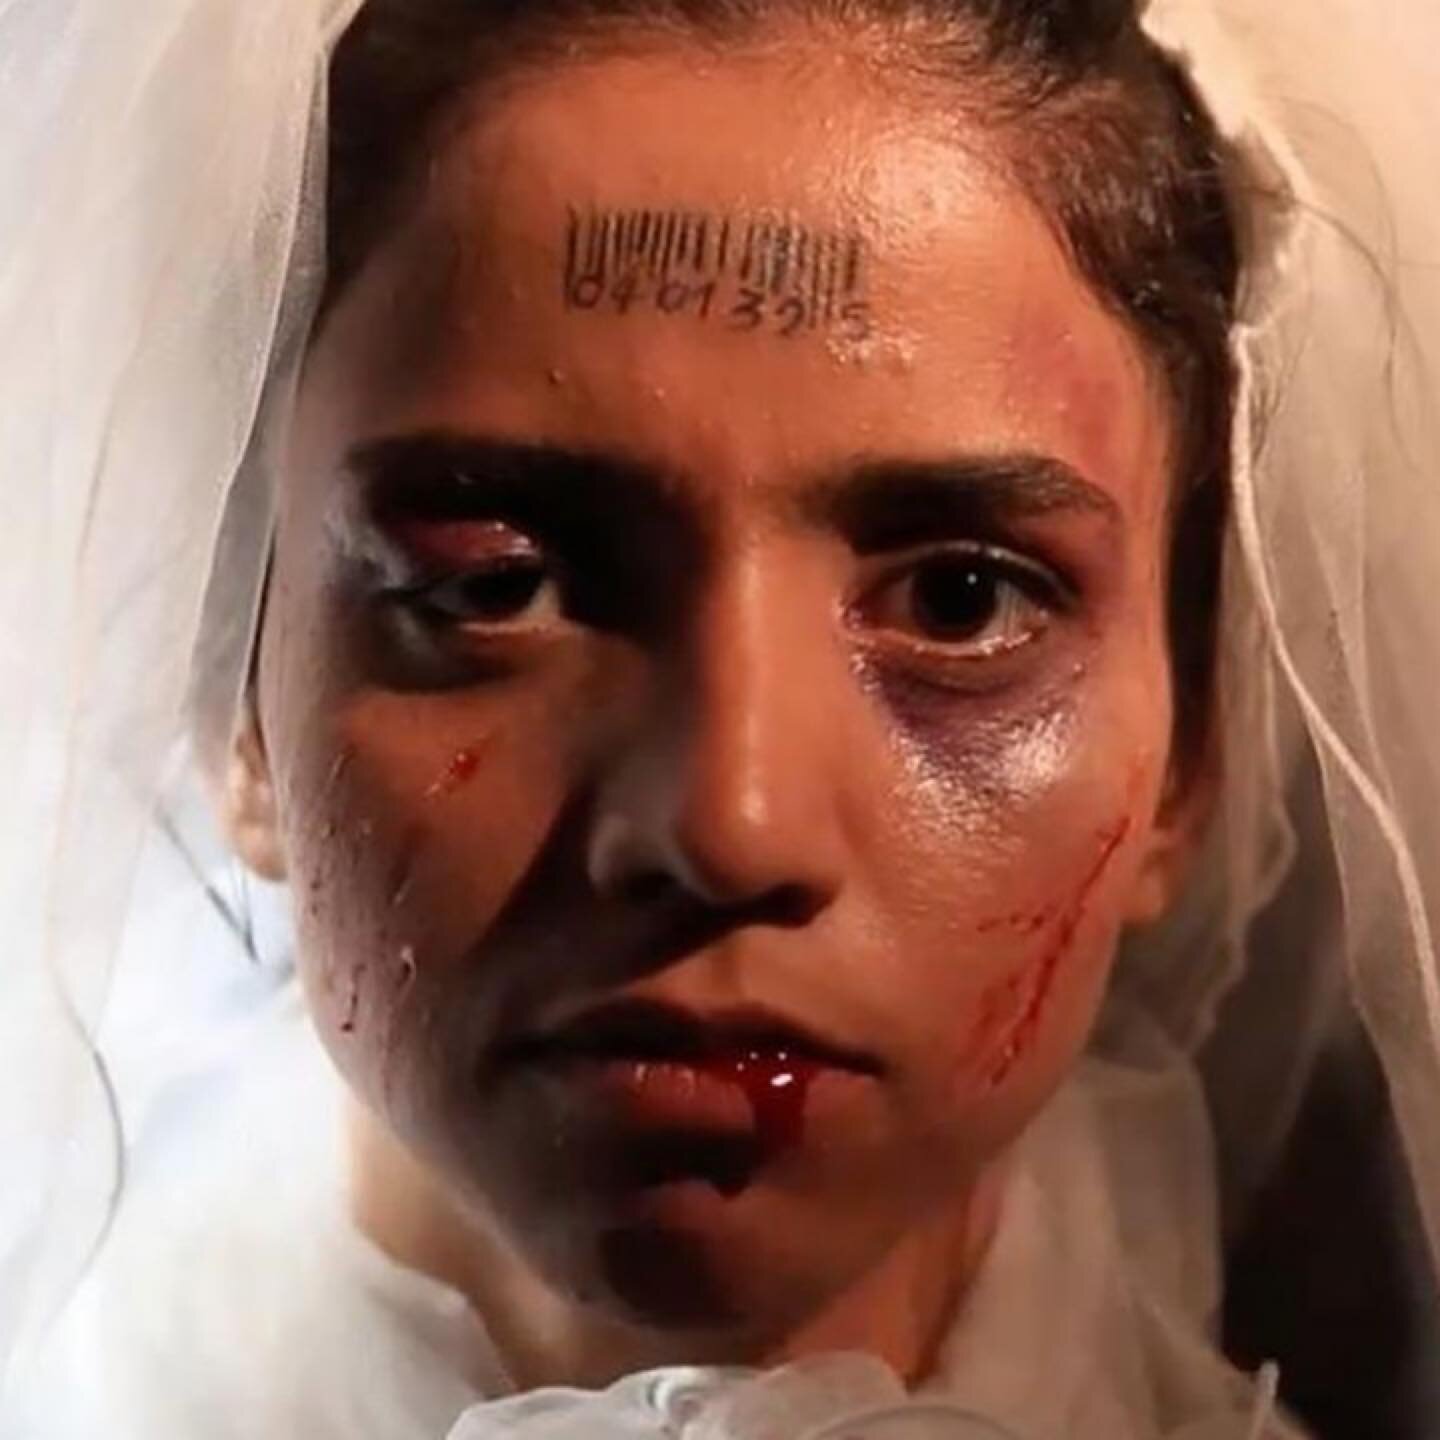 Free event featuring SONITA @upstate_films ON Wednesday, May 10 @7:15&hellip;

Sonita Alizadeh is an Afghan rapper and activist currently studying at Bard College. She was the subject of the documentary film SONITA, which follows her as a 15-year-old